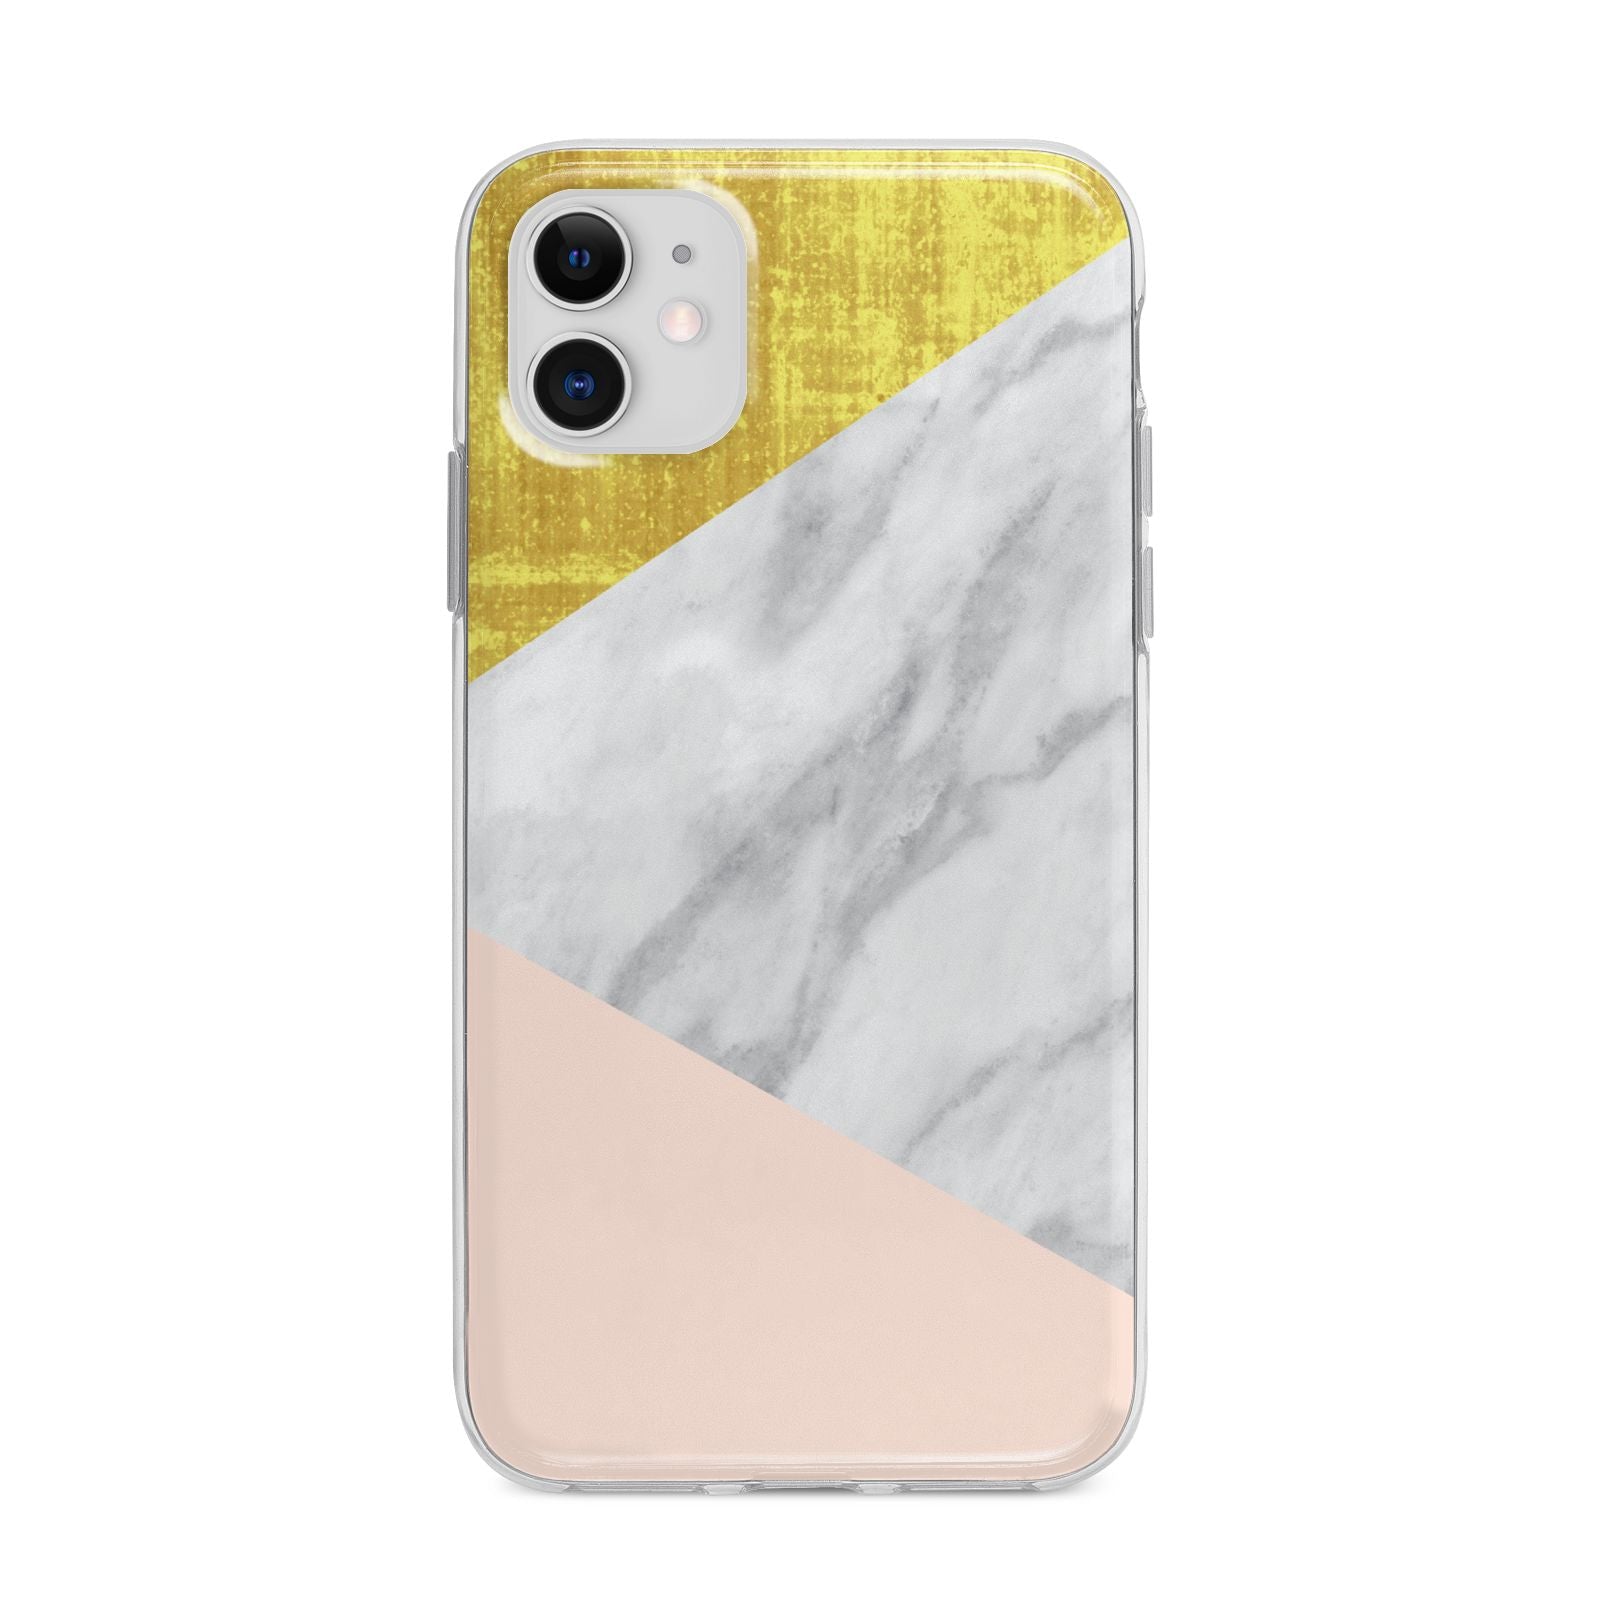 Marble White Gold Foil Peach Apple iPhone 11 in White with Bumper Case